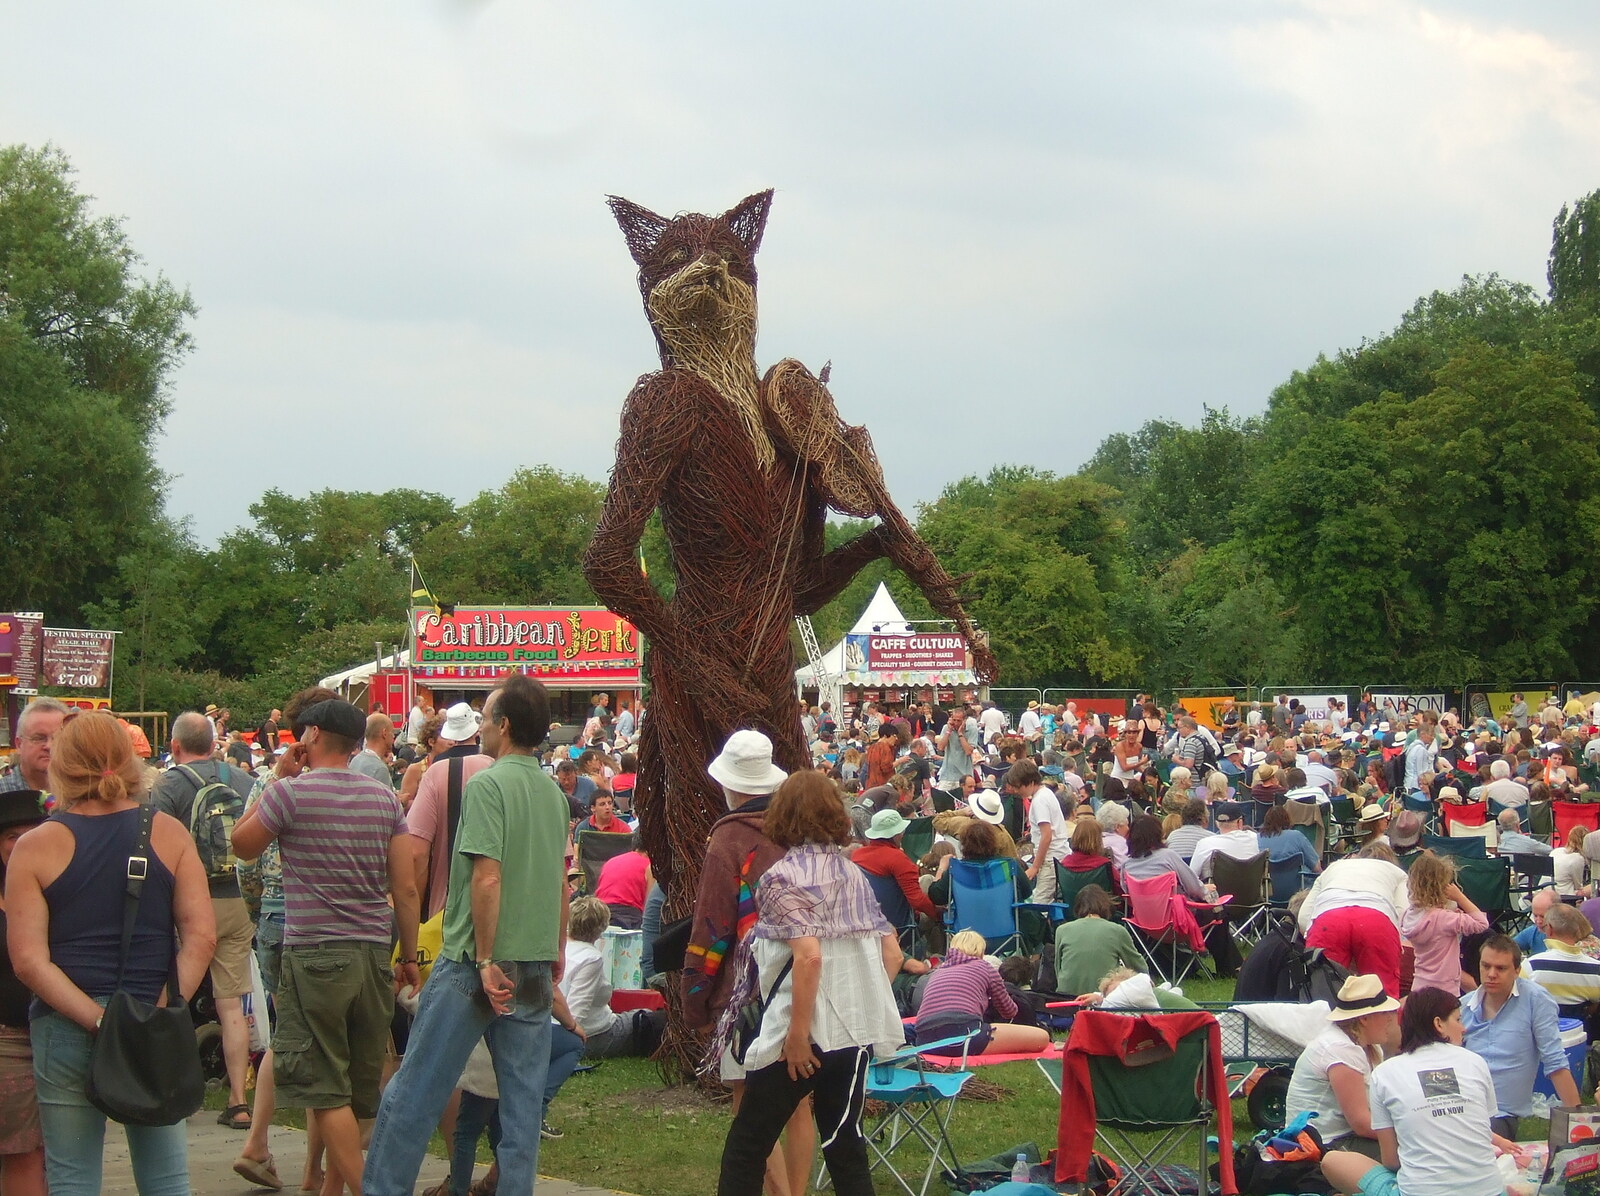 There's a big wicker fox with a fiddle from The Cambridge Folk Festival, Cherry Hinton, Cambridge - 28th July 2012